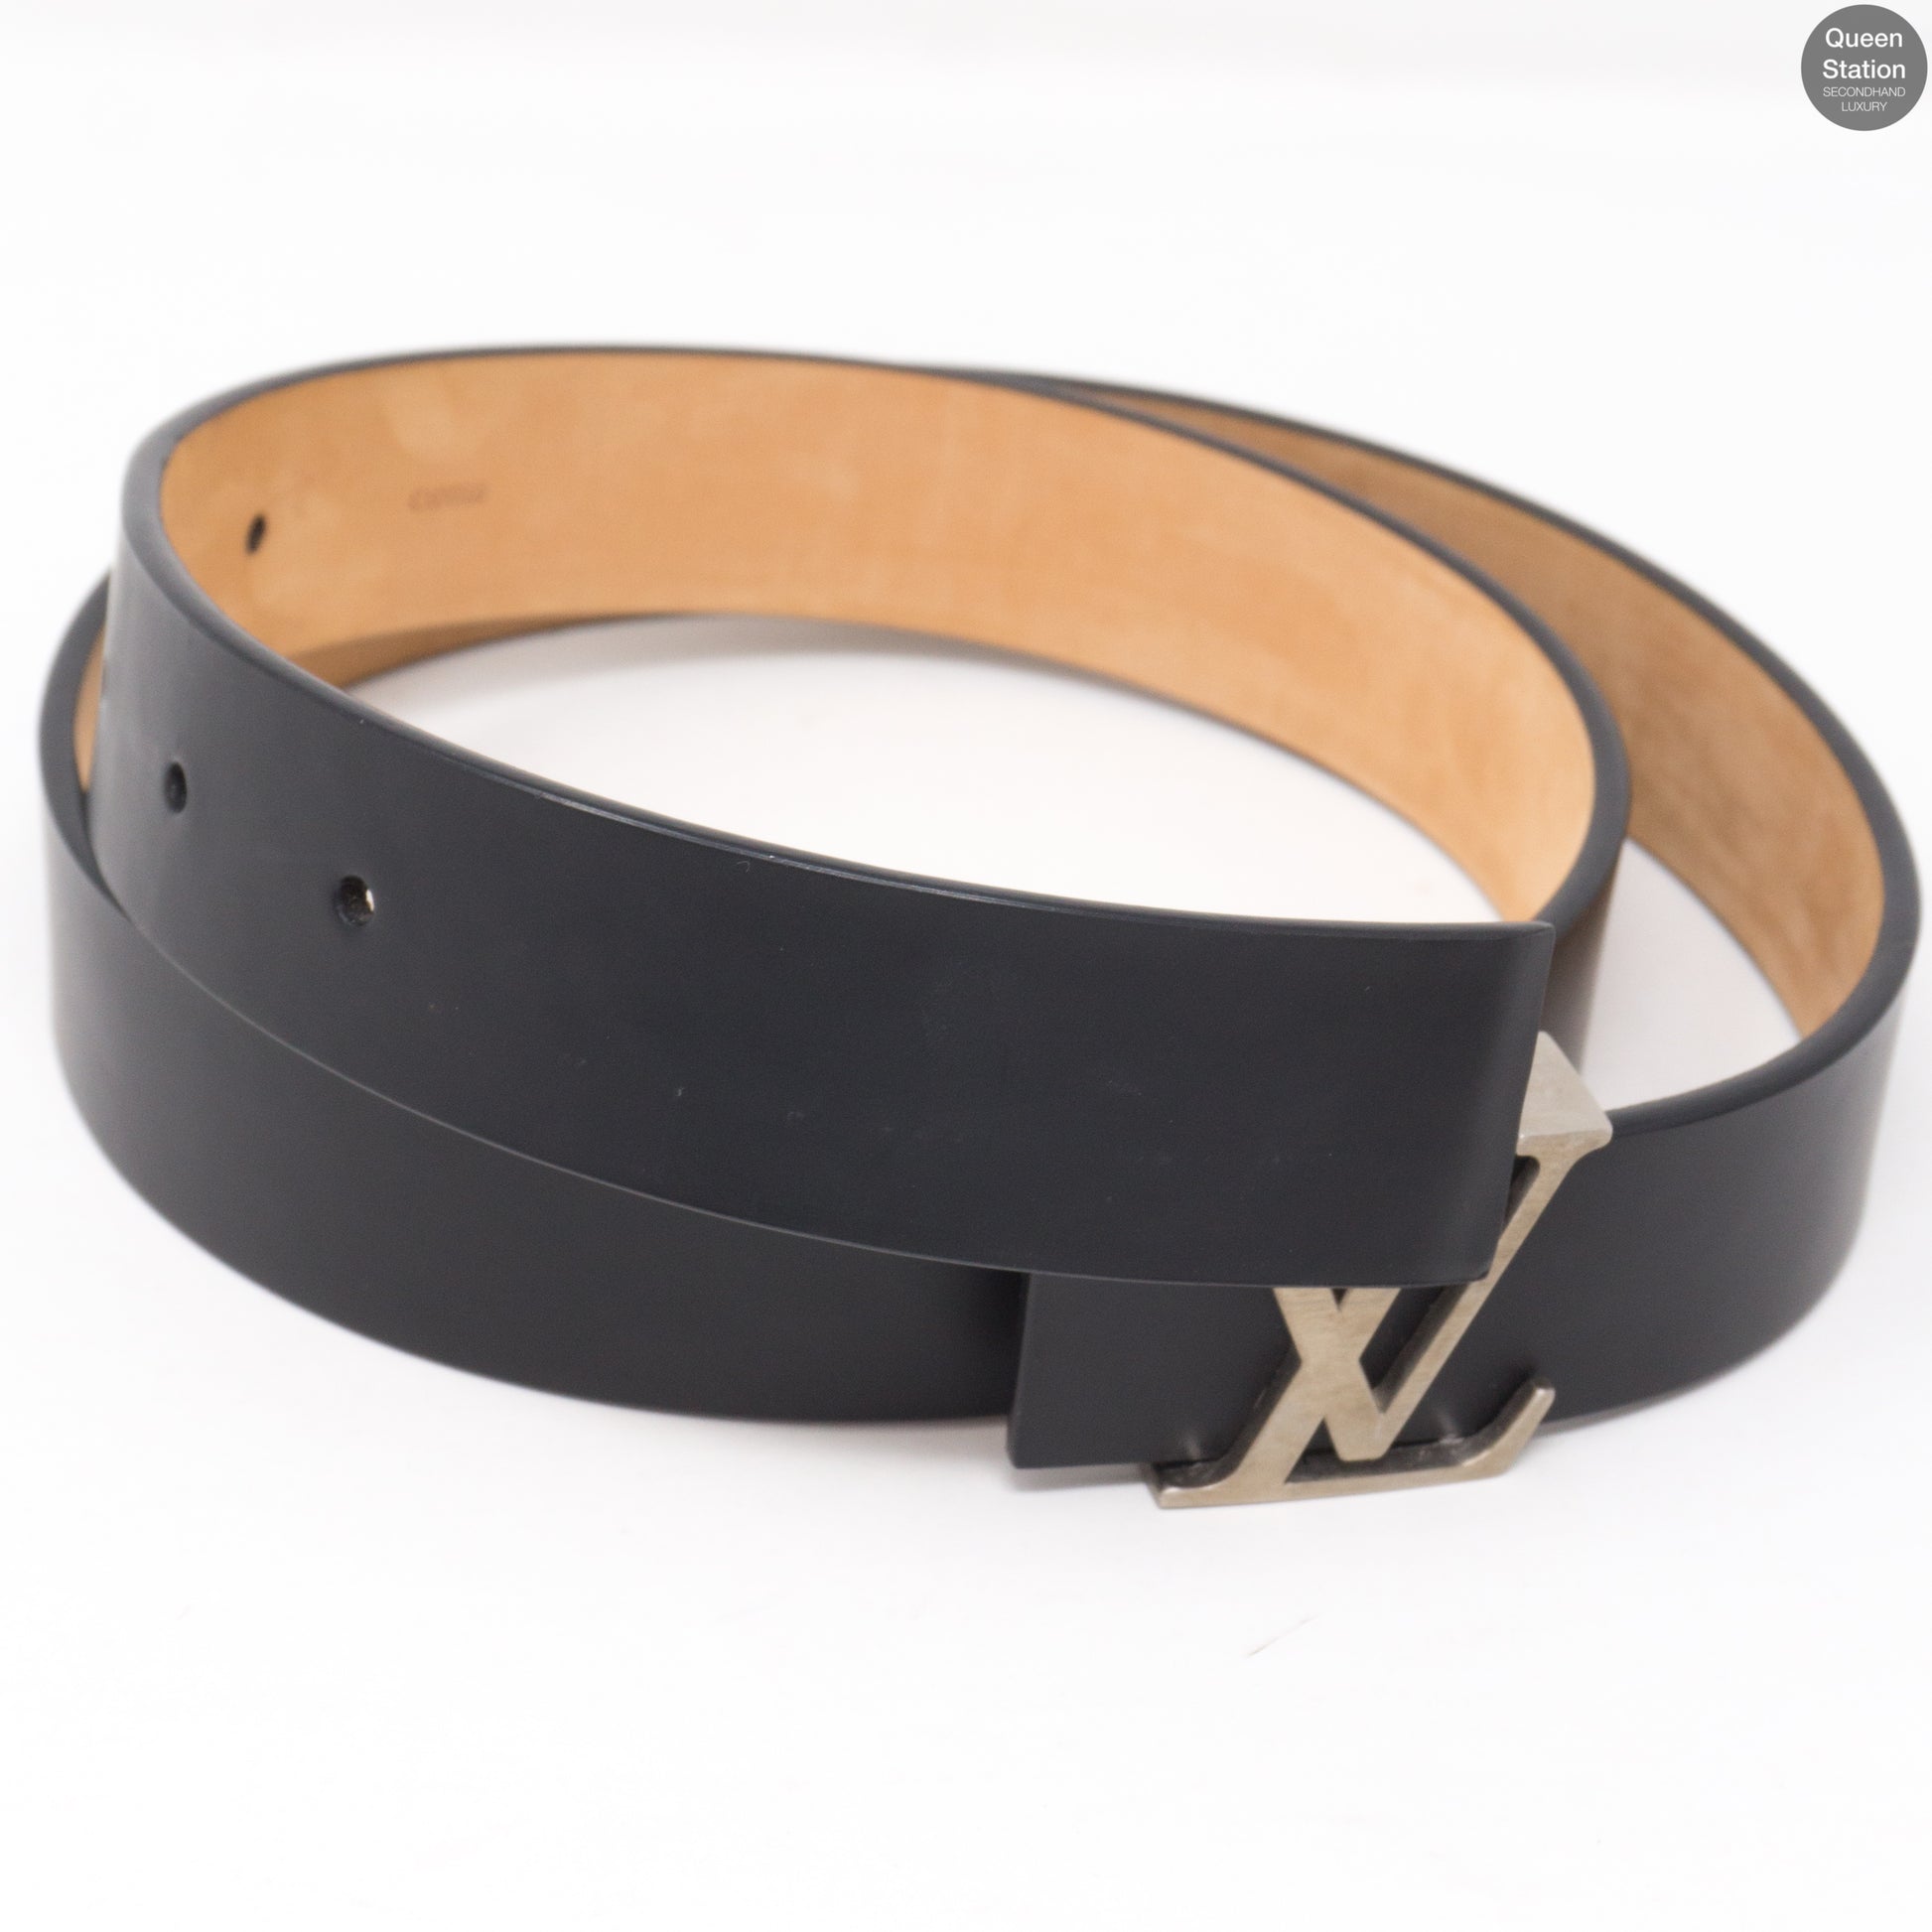 Initiales leather belt Louis Vuitton Black size L International in Leather  - 29696107